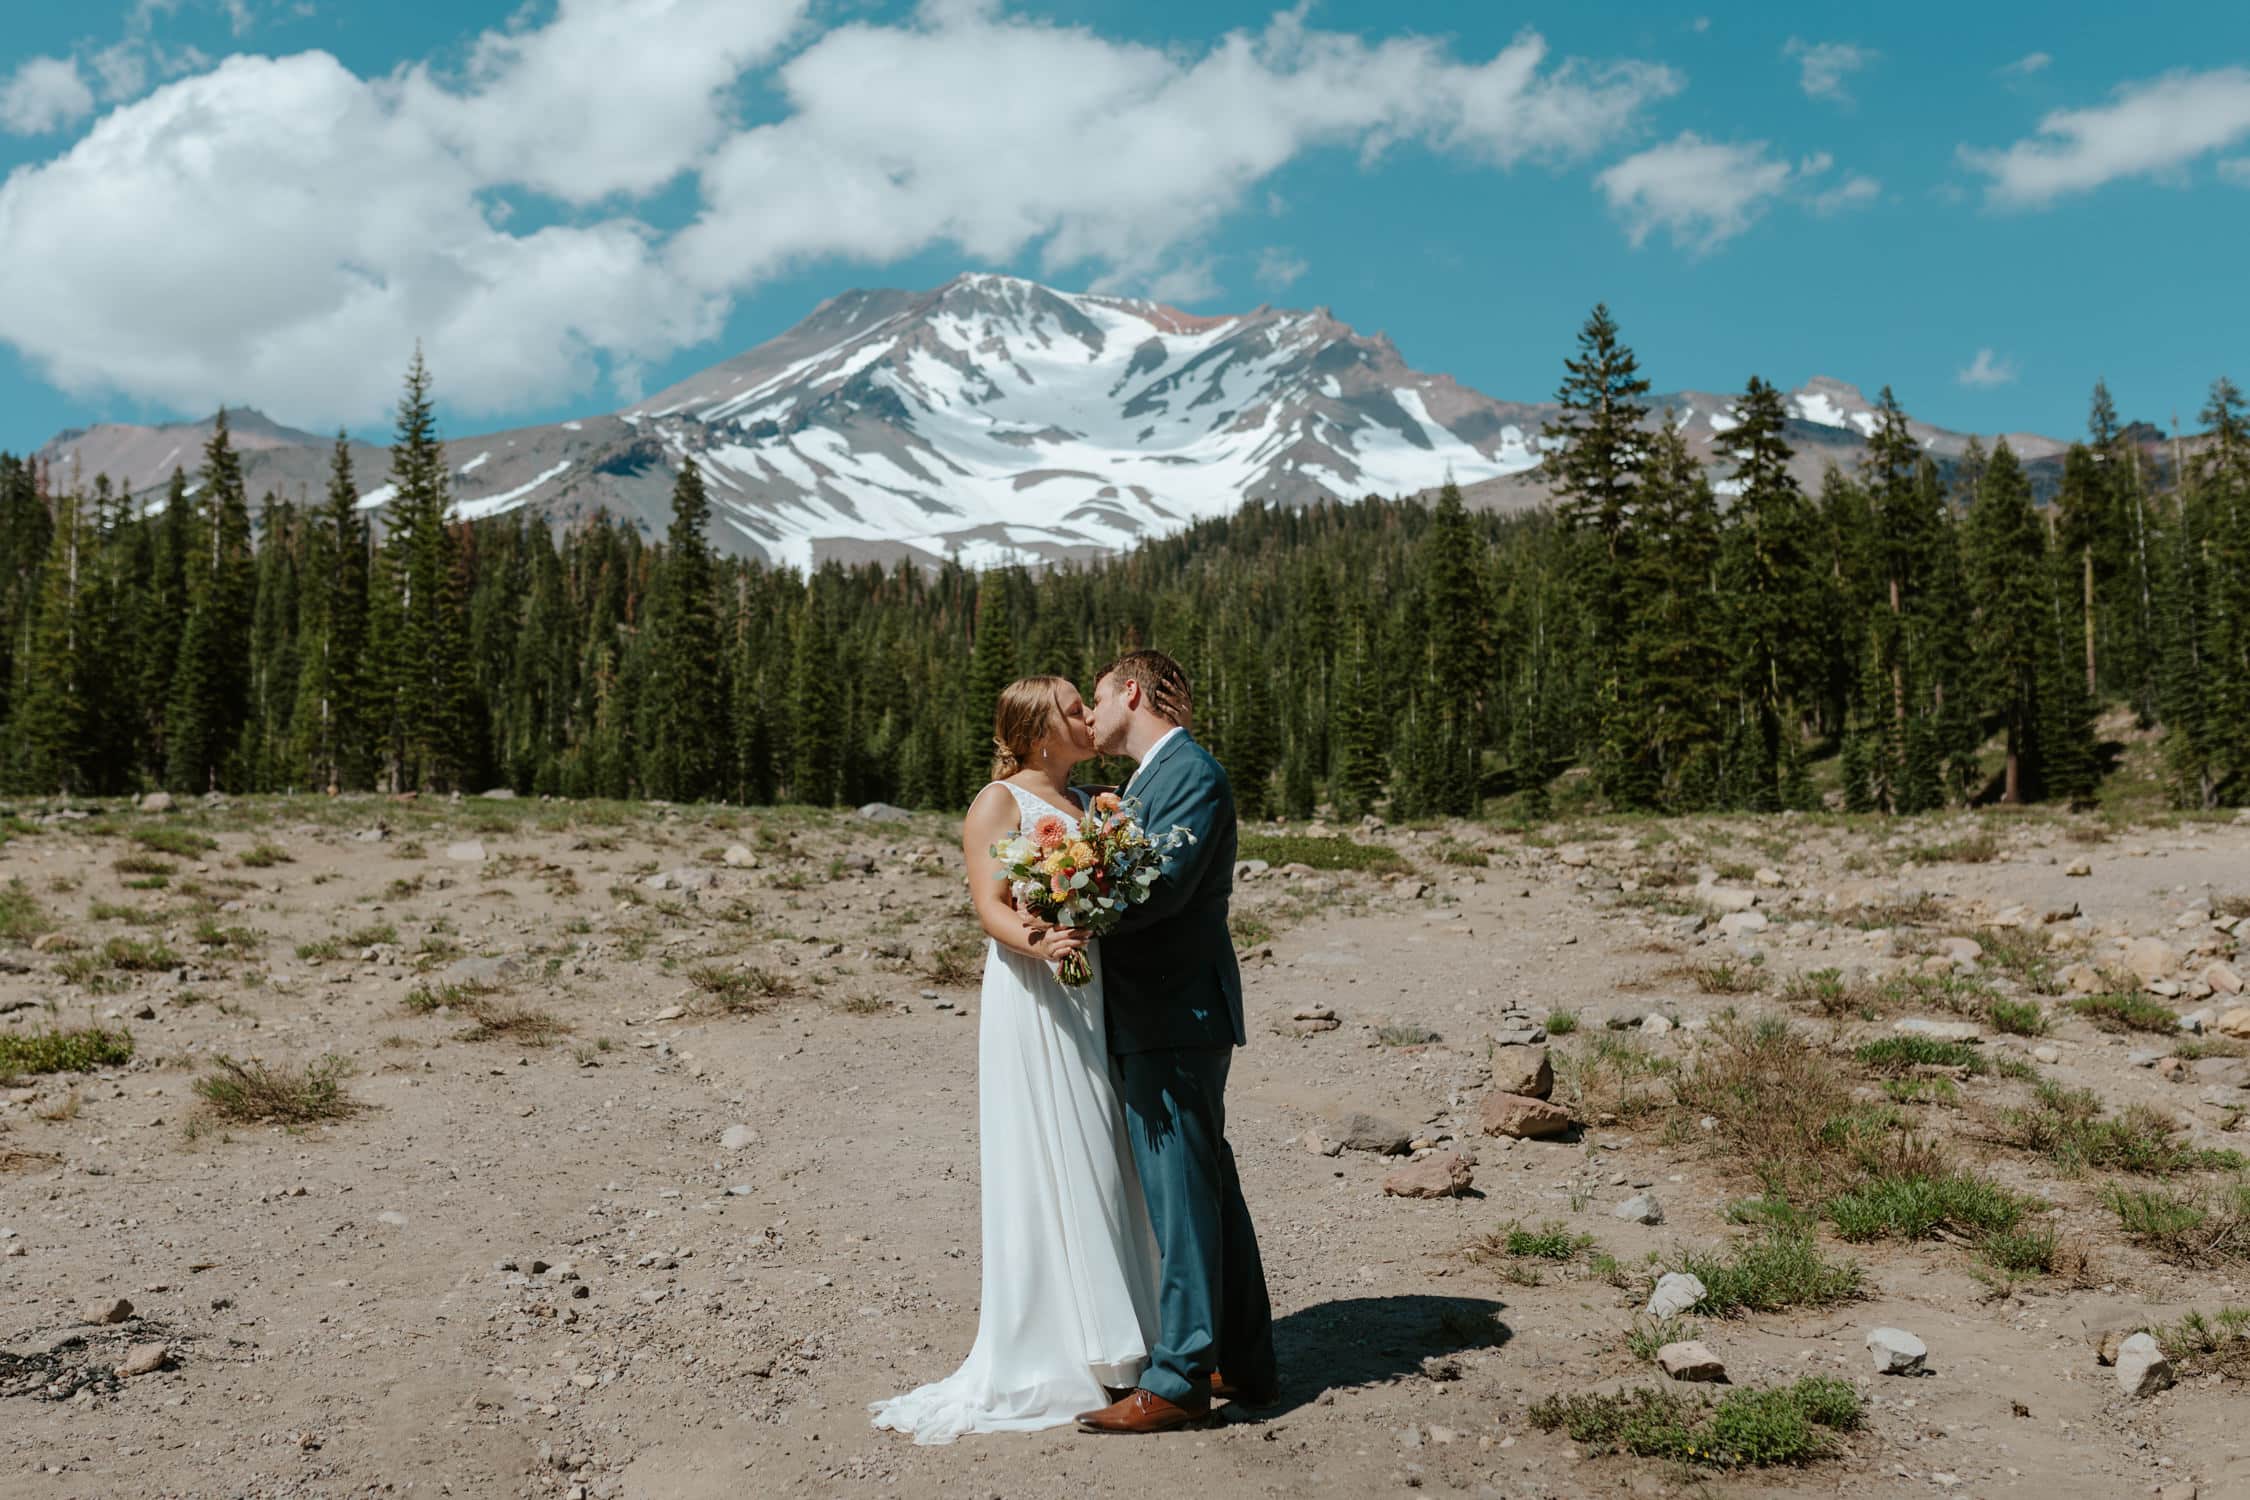 A bride and groom kissing in front of Mt. Shasta on their wedding day.